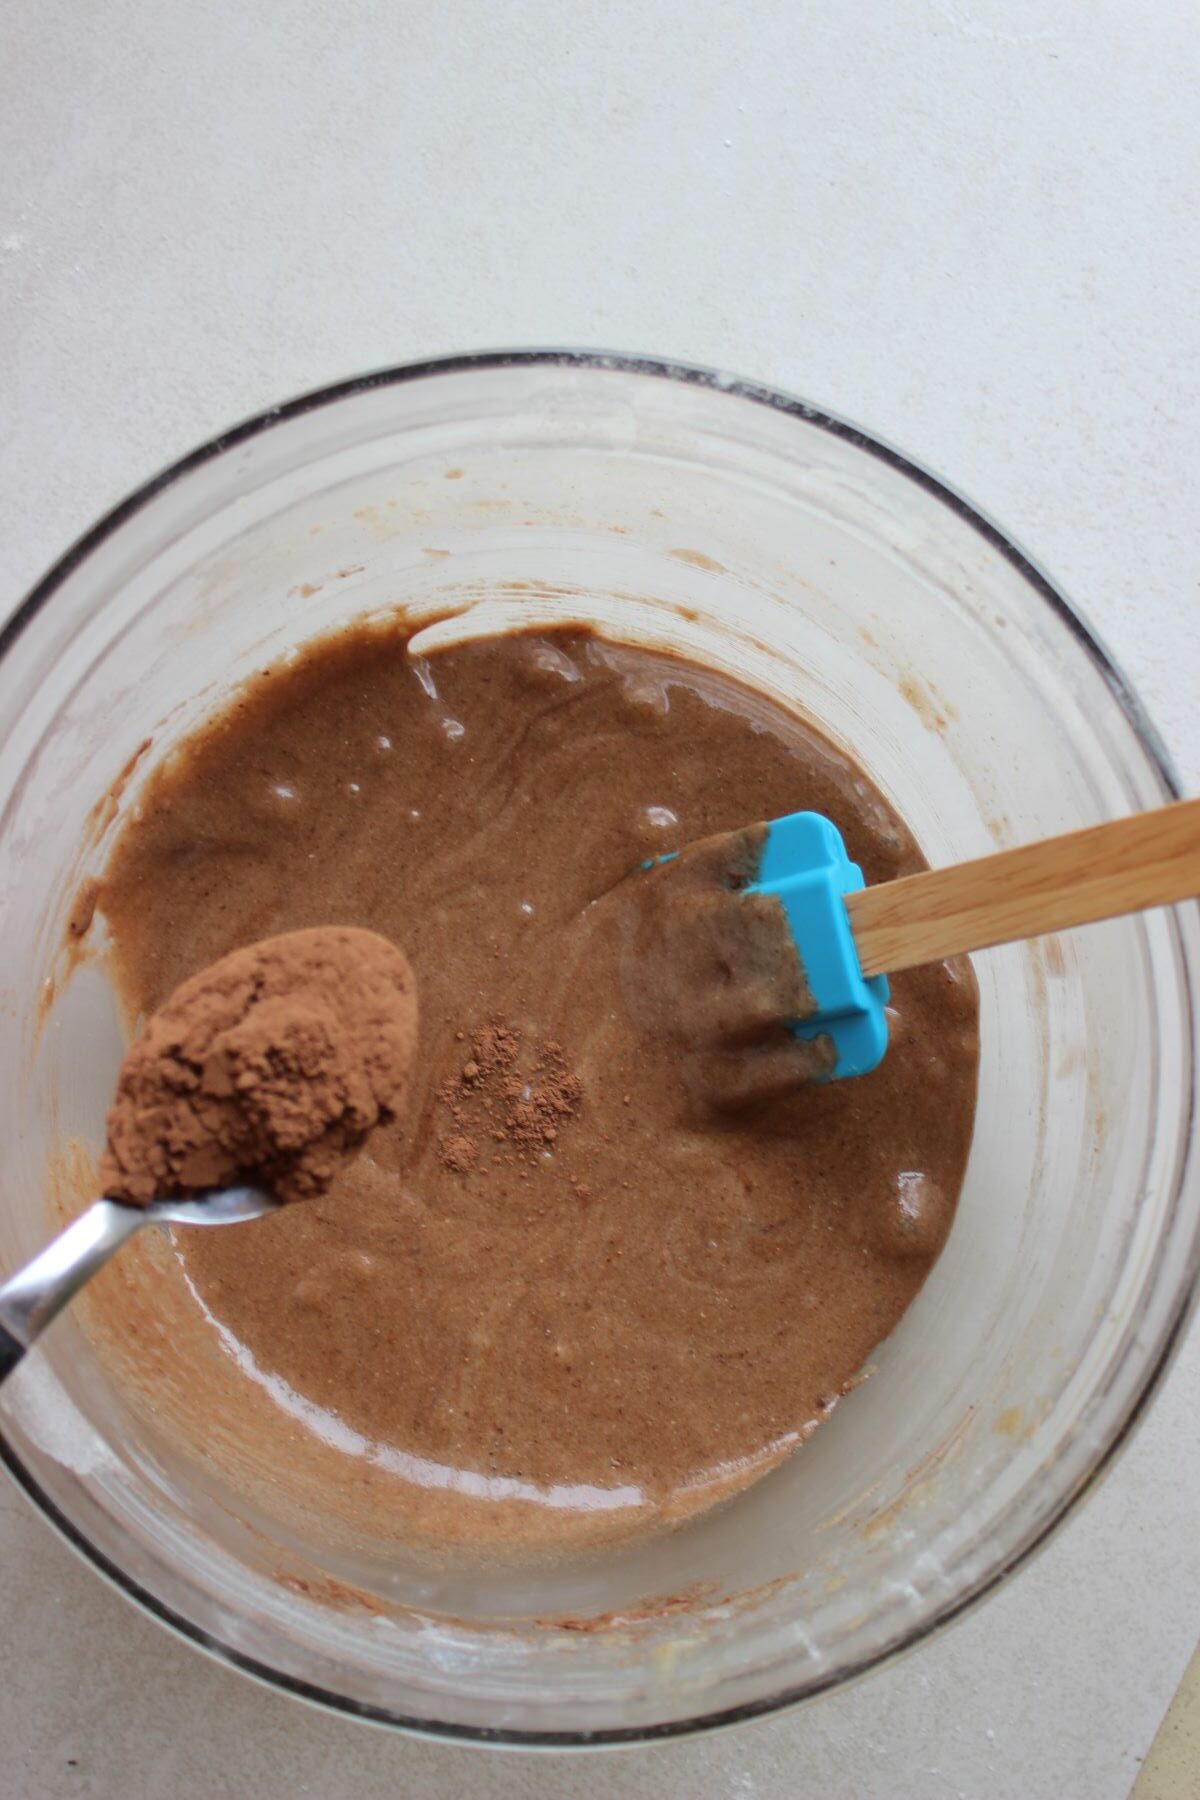 A spoon with cacao is about to be poured into a bowl with a brown mixture.